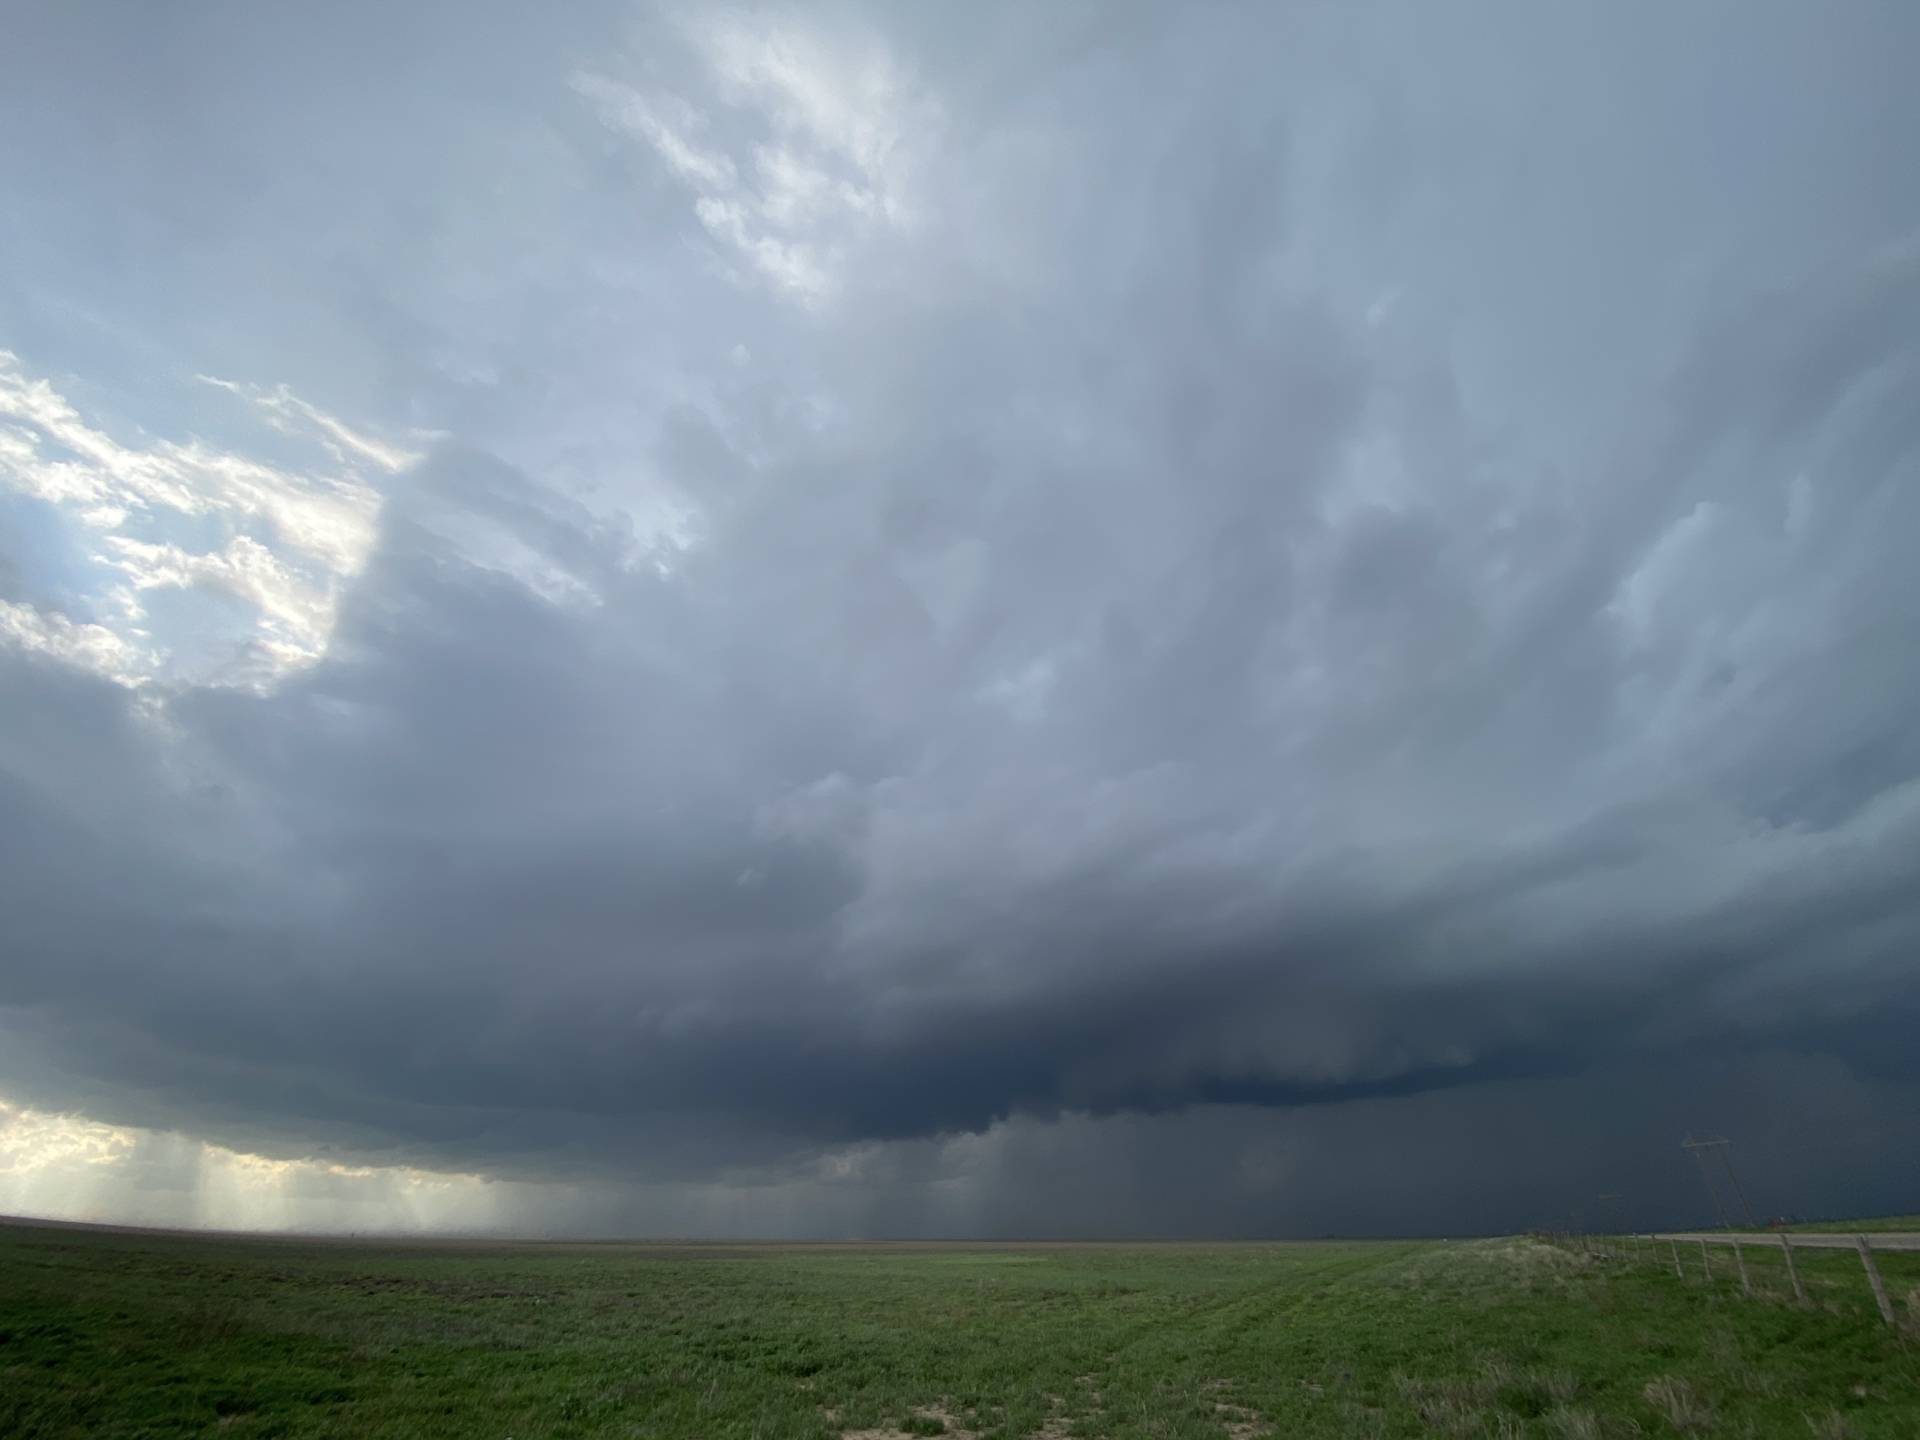 And sup #3 east of Stratford, TX #txwx
..